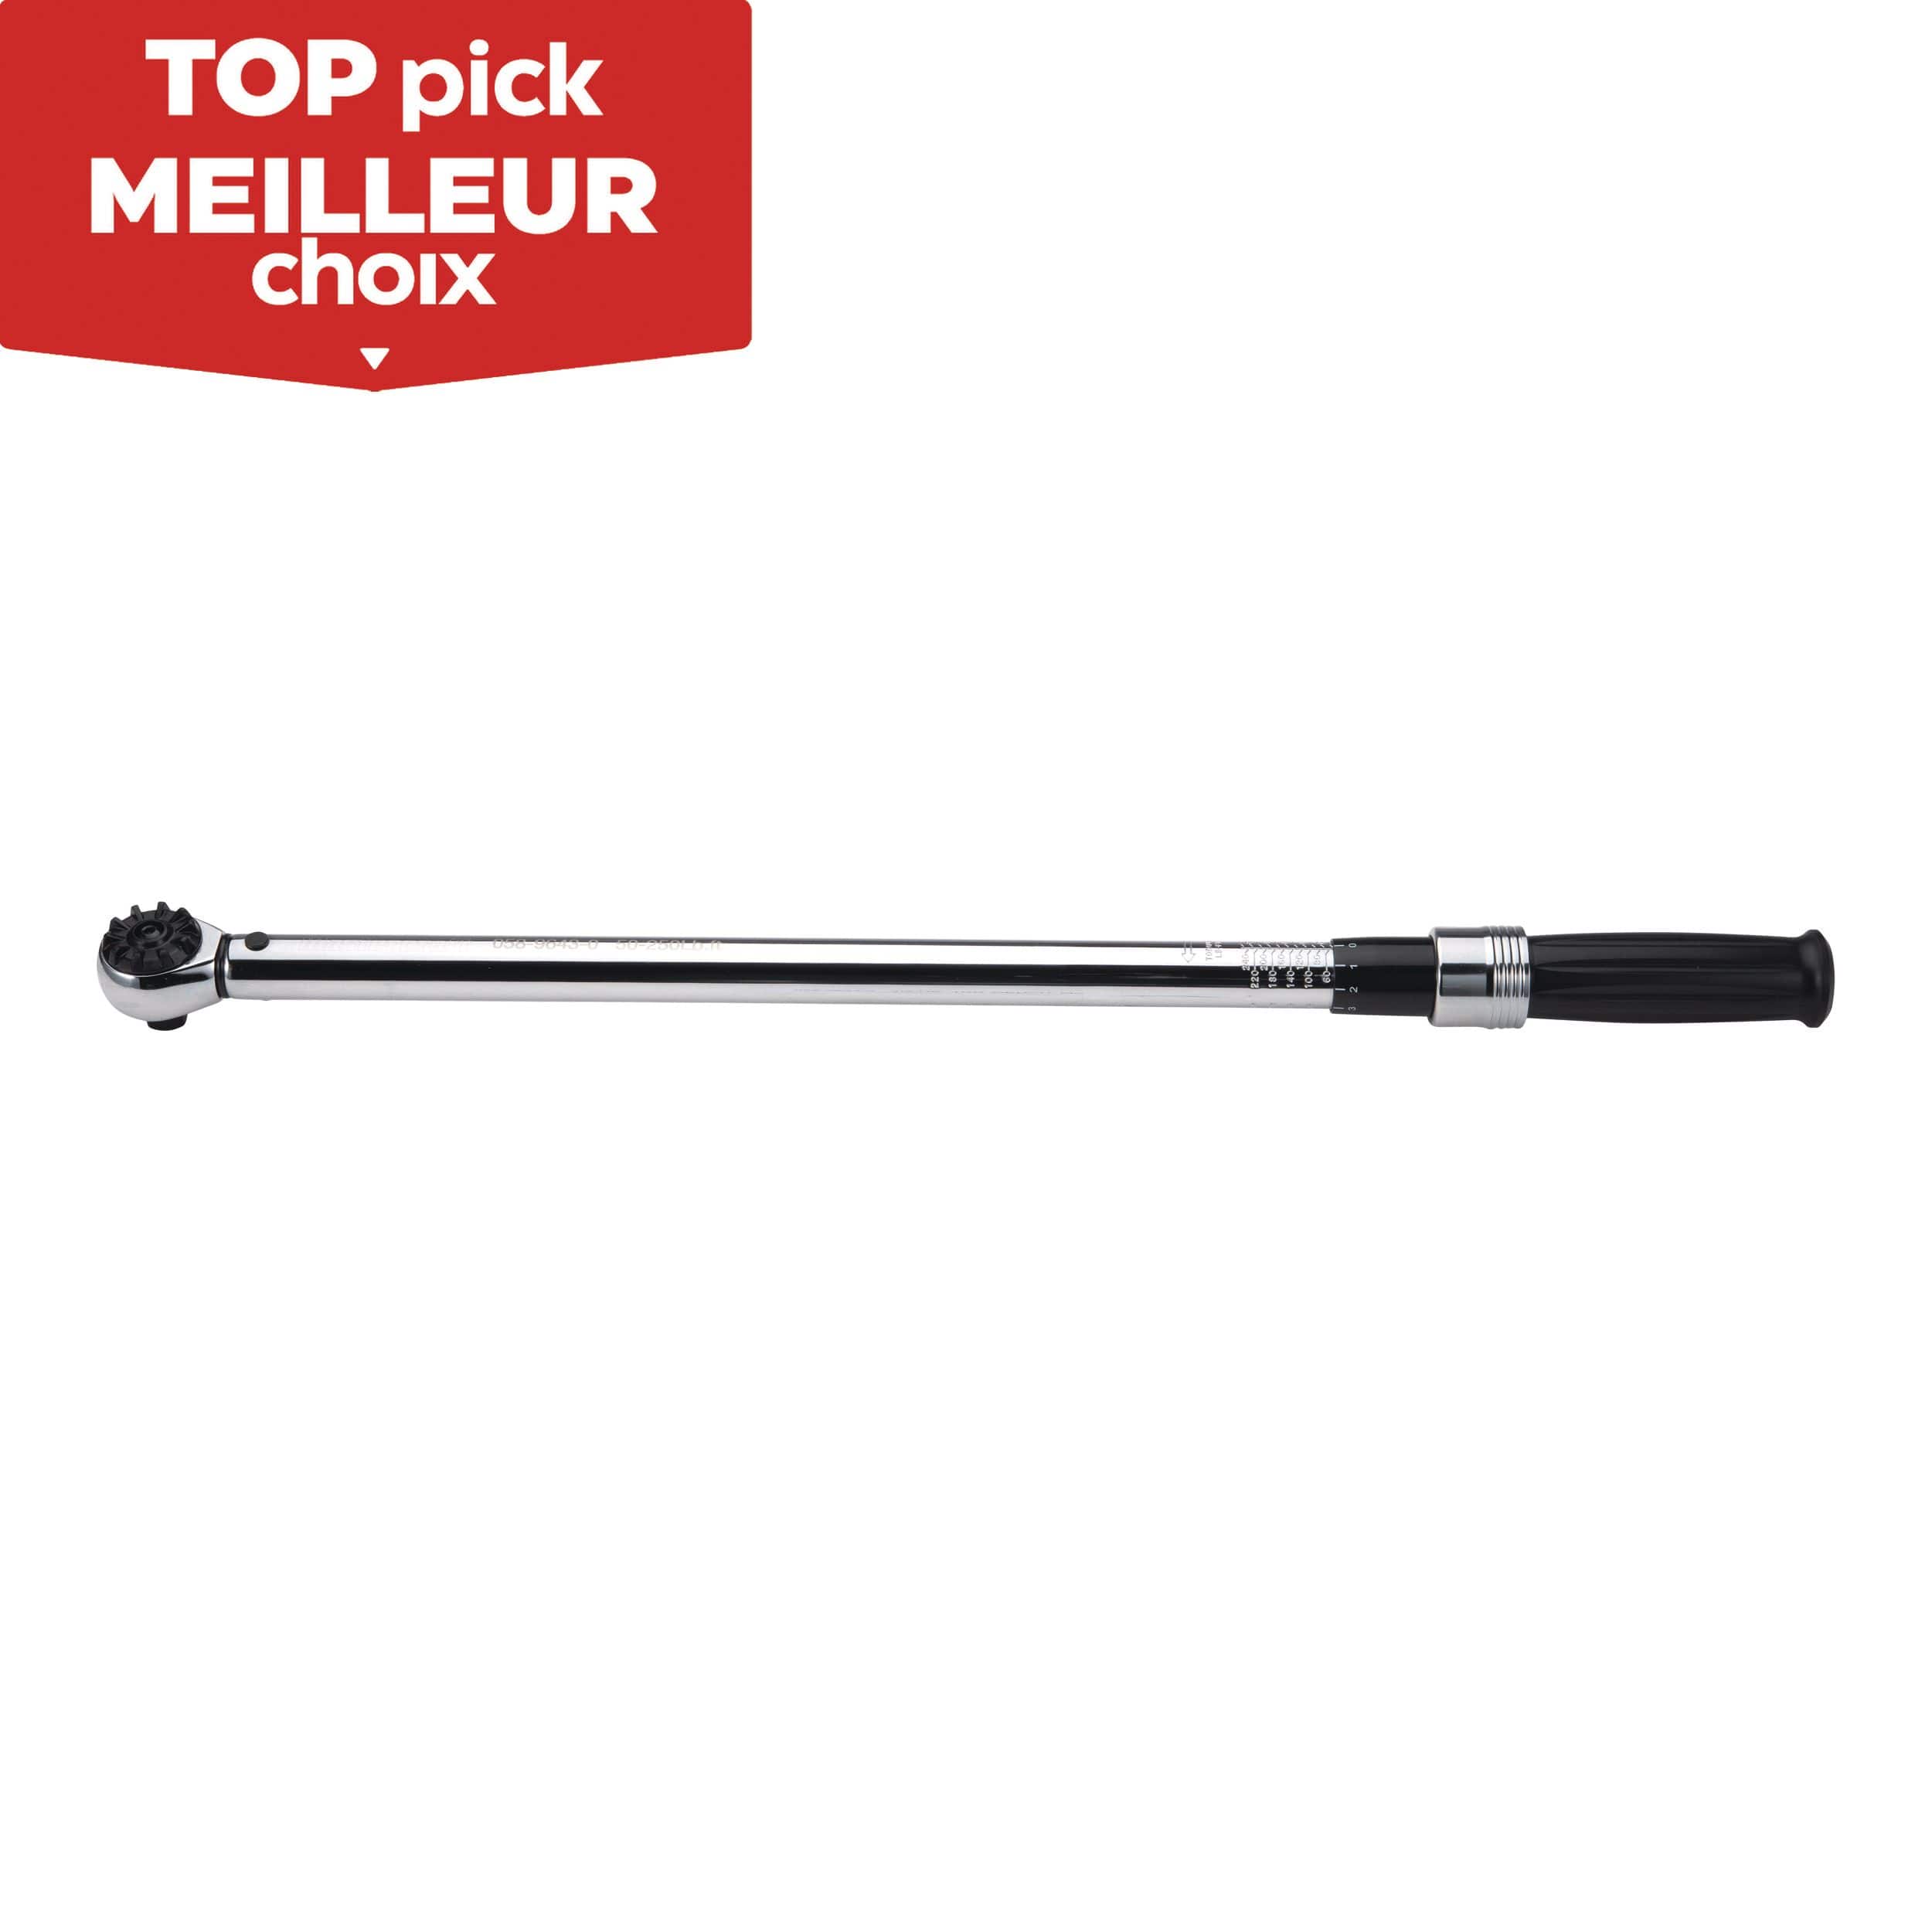 Mastercraft 1/2-in Drive, Torque Wrench, 50-250 ft-lbs | Canadian Tire